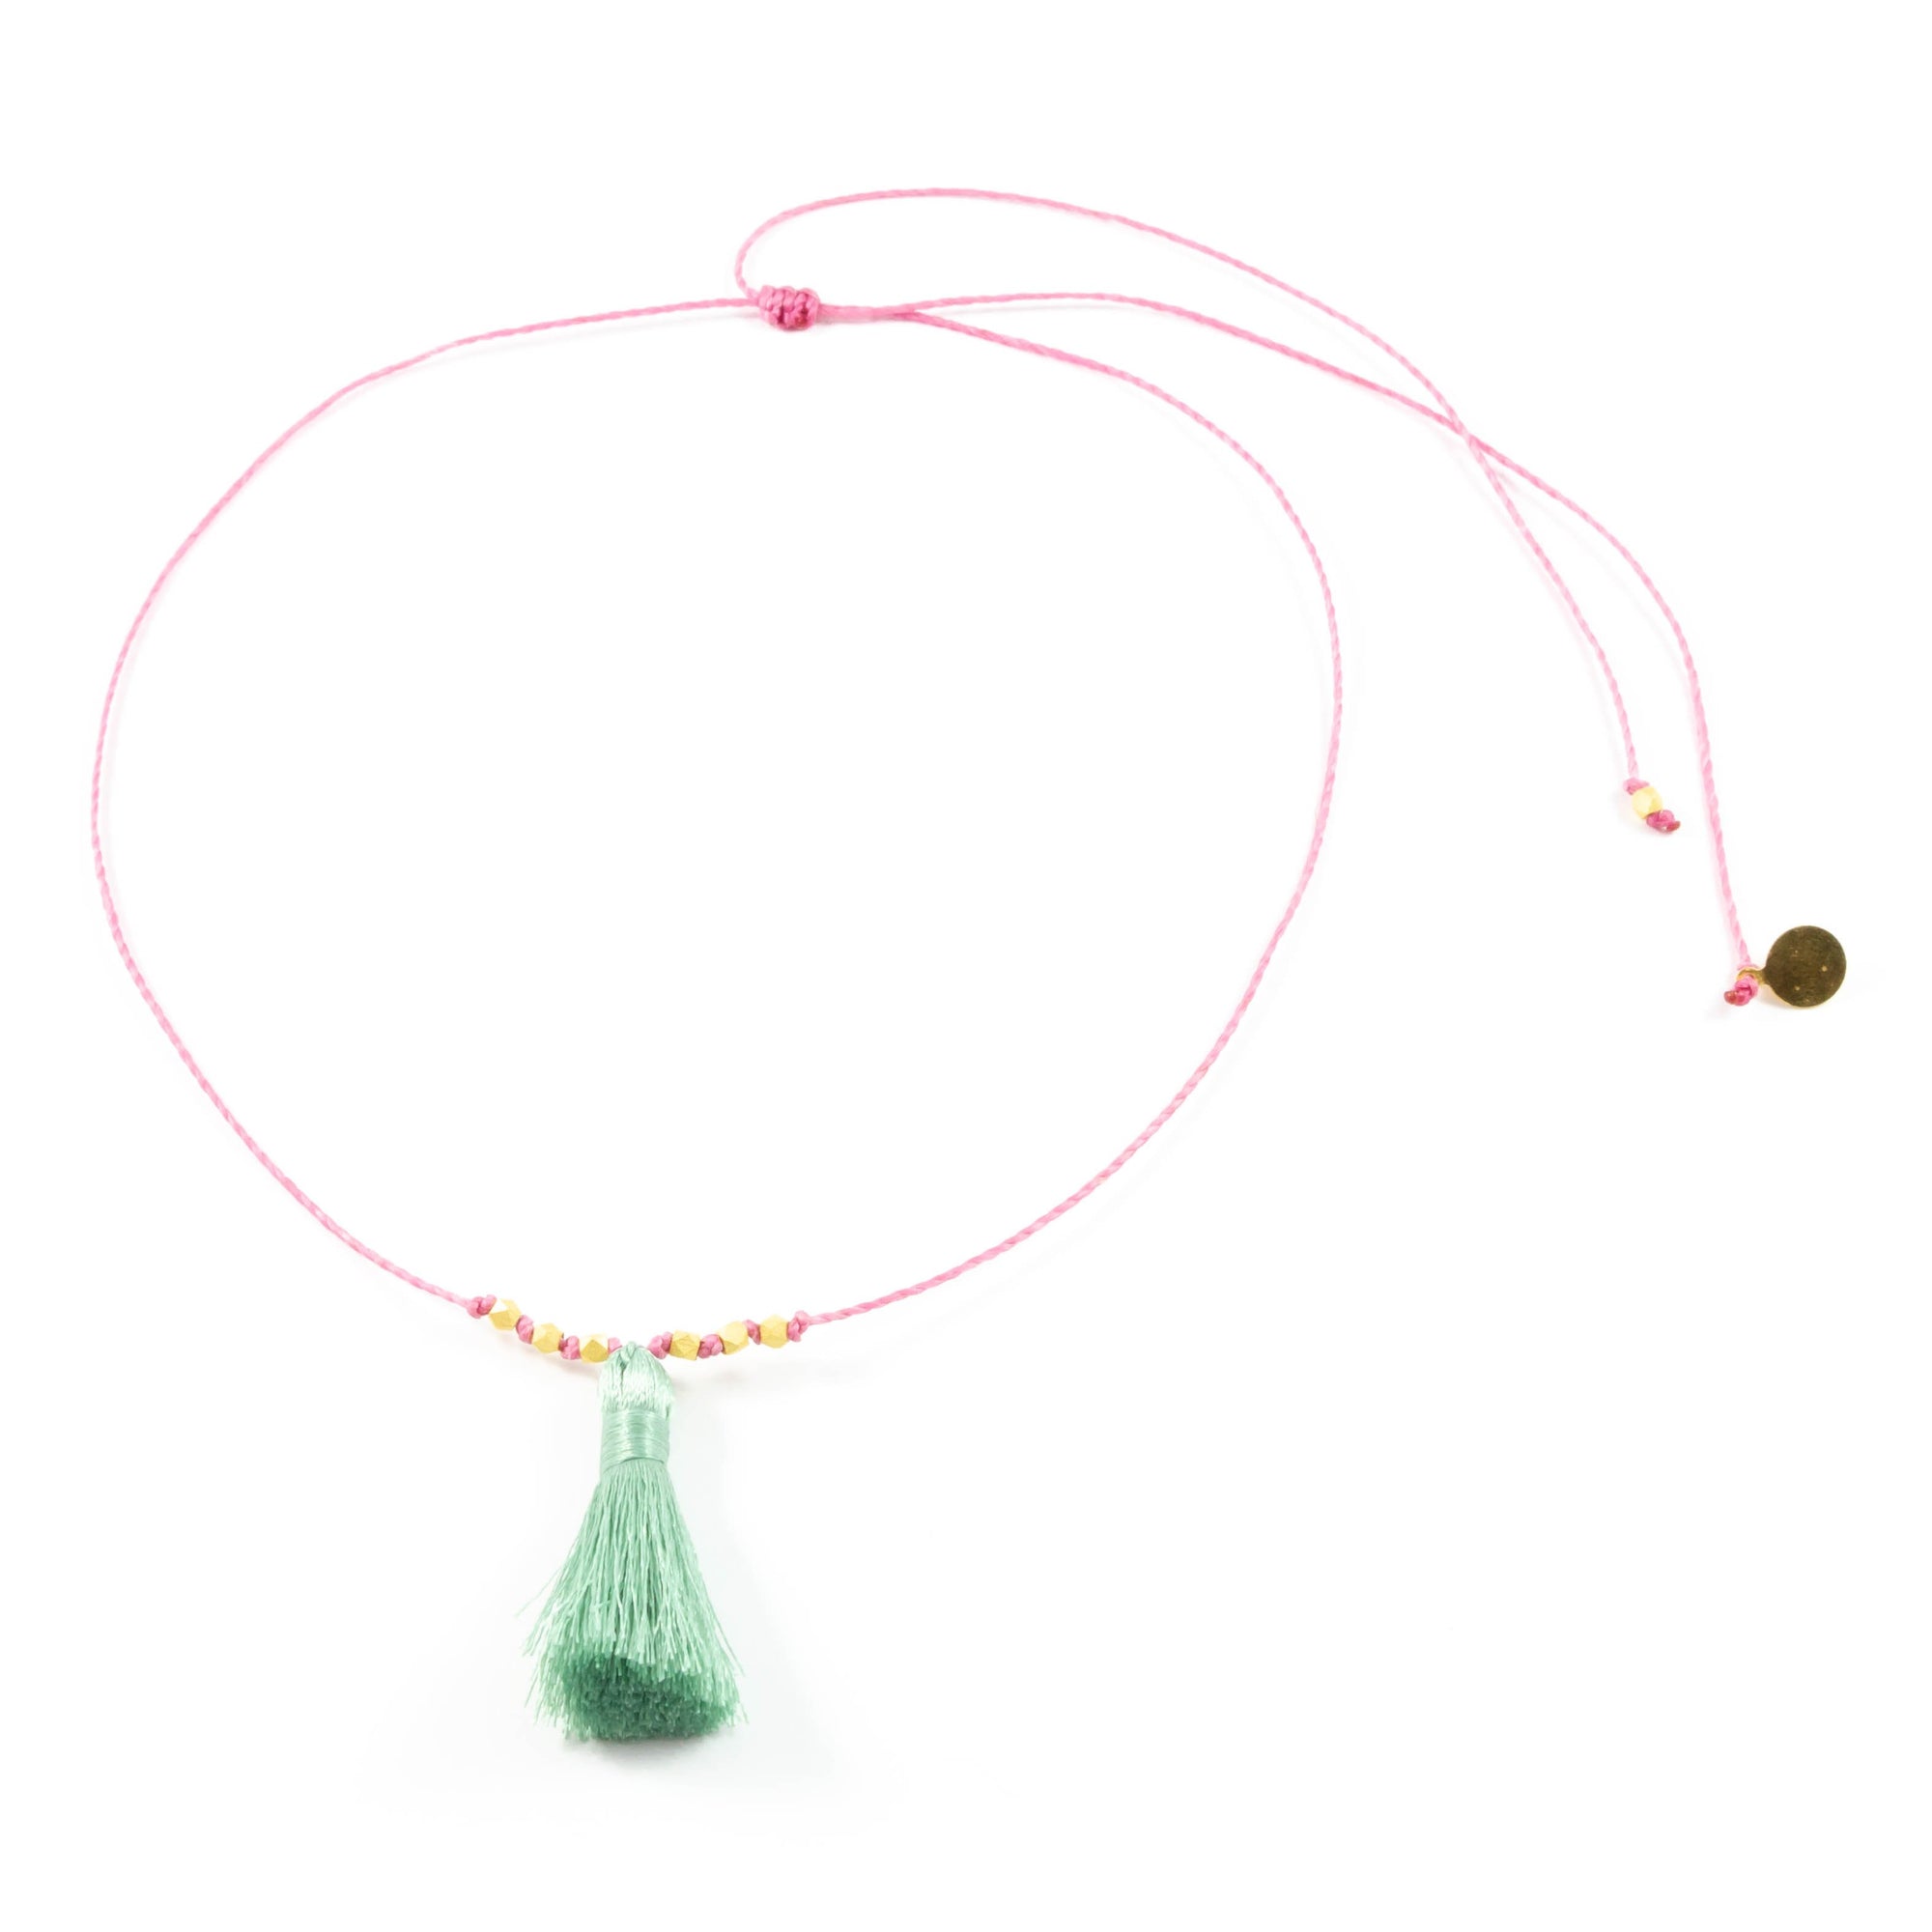 Rose w/ Cucumber Tassel On a String Necklace in Gold